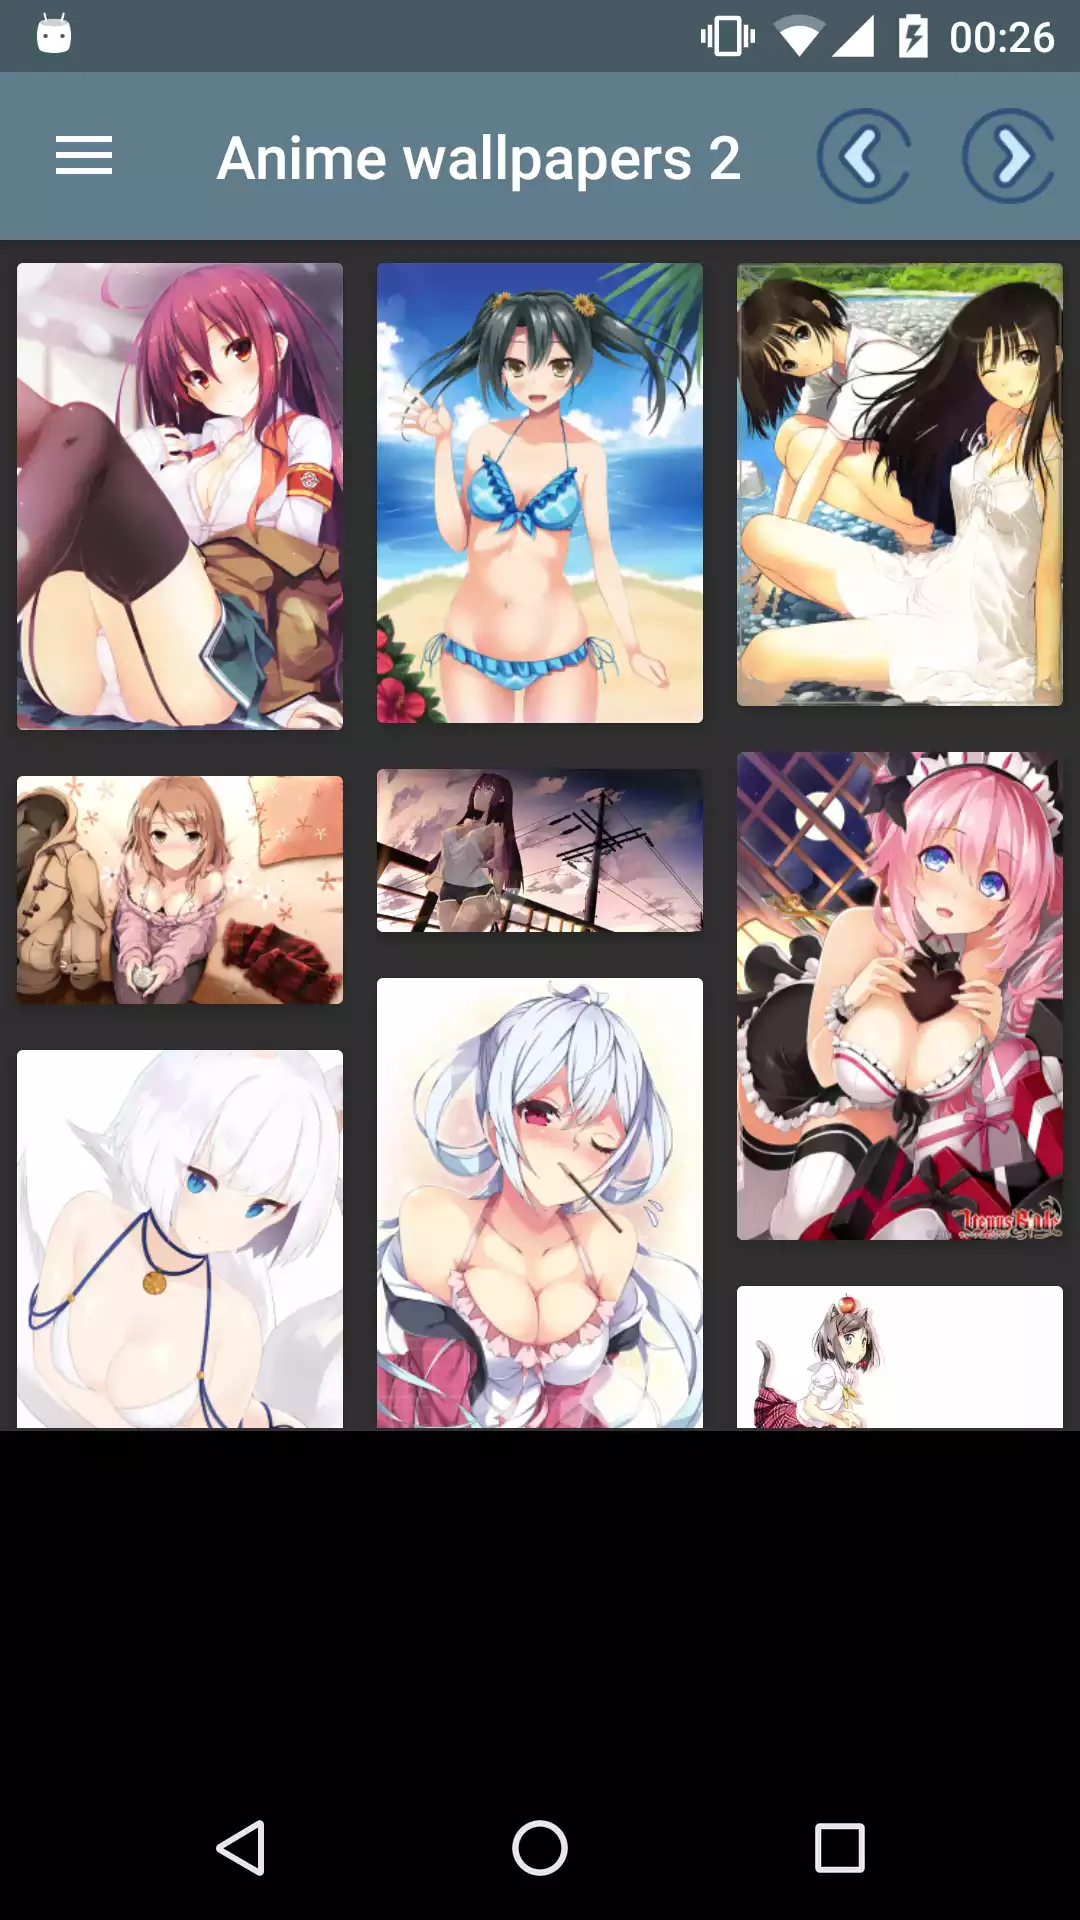 Sexy Anime Wallpapers anime,pornstar,image,app,drawings,video,adult,japan,galleries,pics,download,henati,wallpapers,hentaimanga,asian,sexy,apk,hentai,hot,gallery